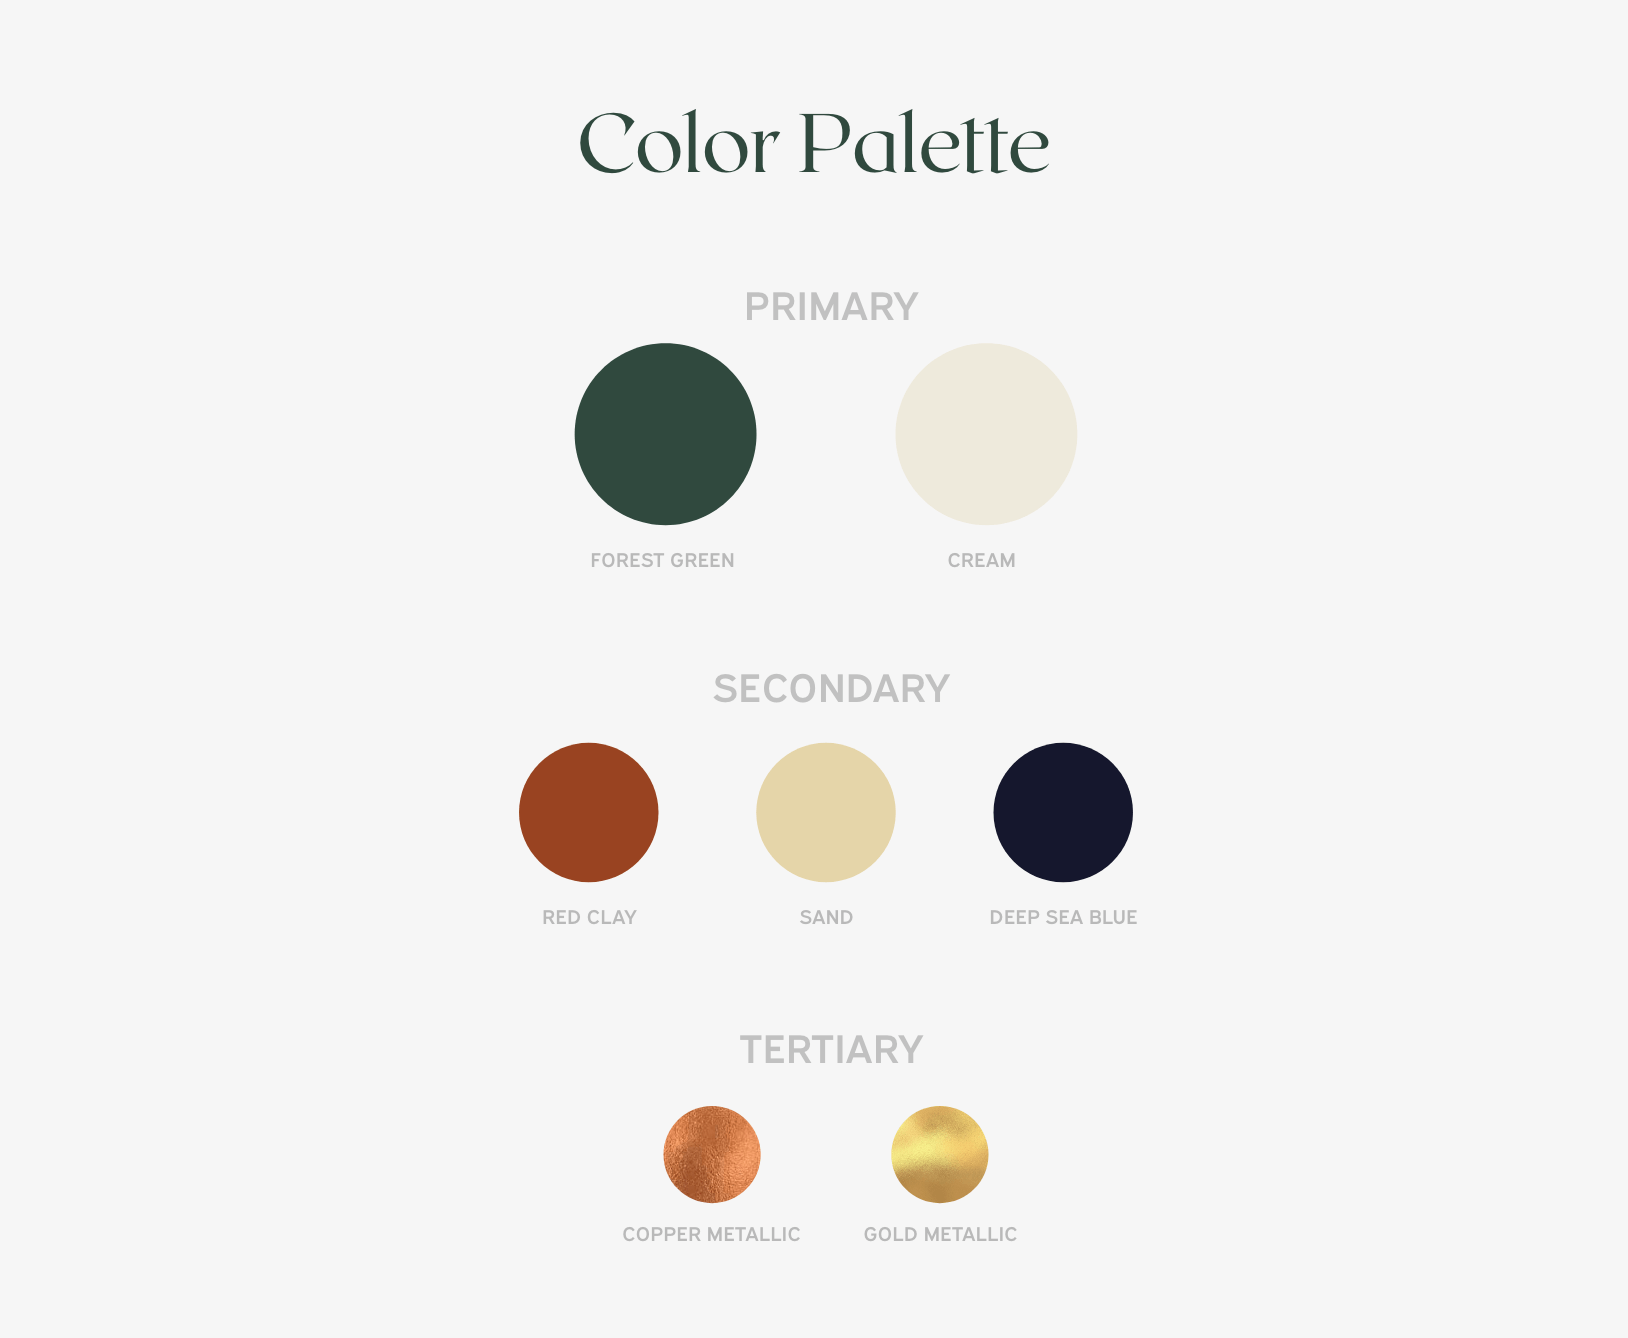 color palette showing primary colors: forest green and cream; secondary colors: red clay, sand, and deep sea blue; and tertiary colors: metallic copper and metallic gold